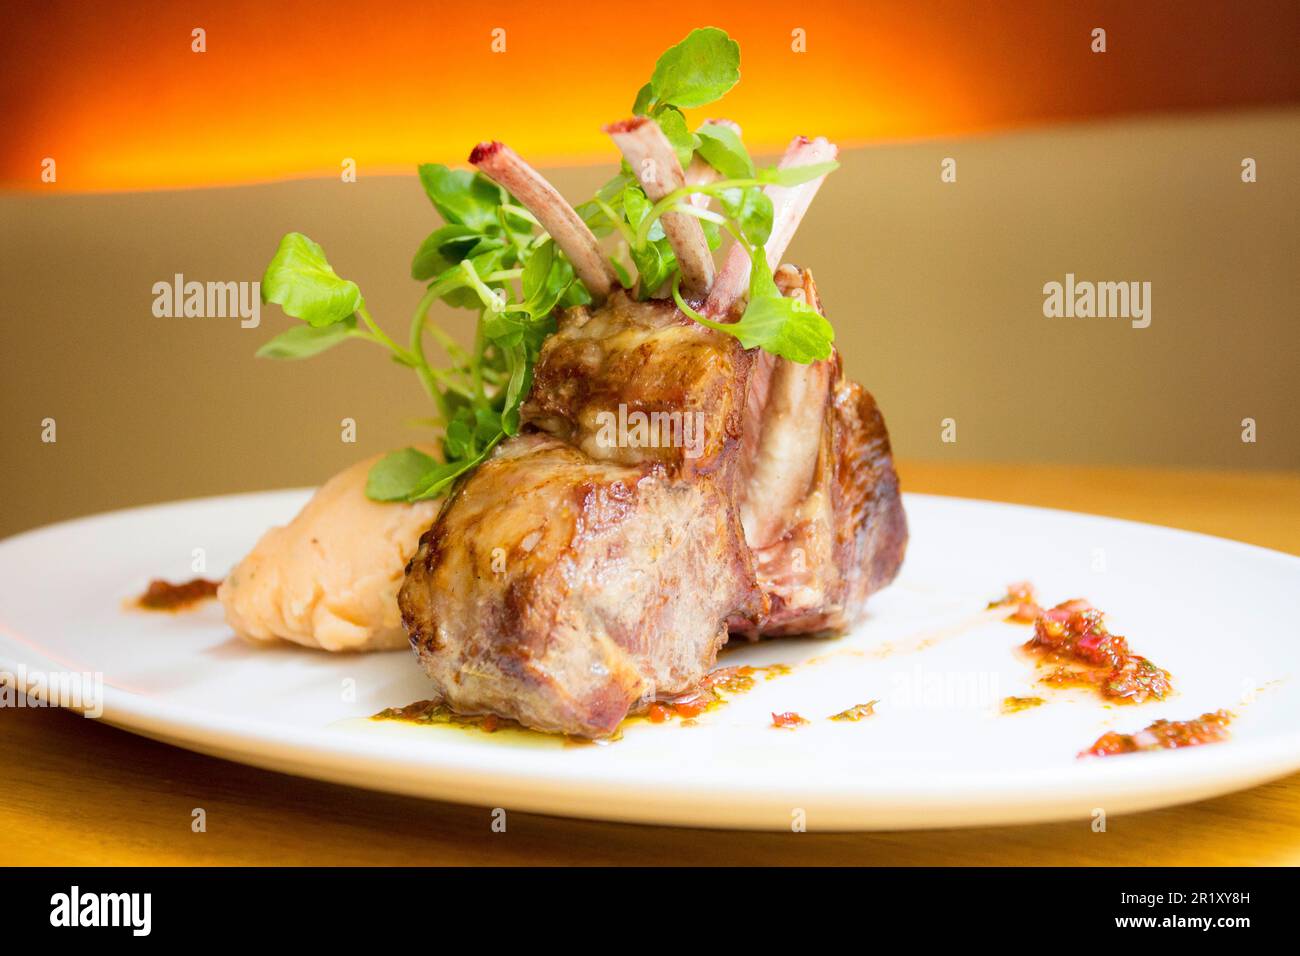 Lamb ribs in a restaurant in spain with some salad on the side. Stock Photo